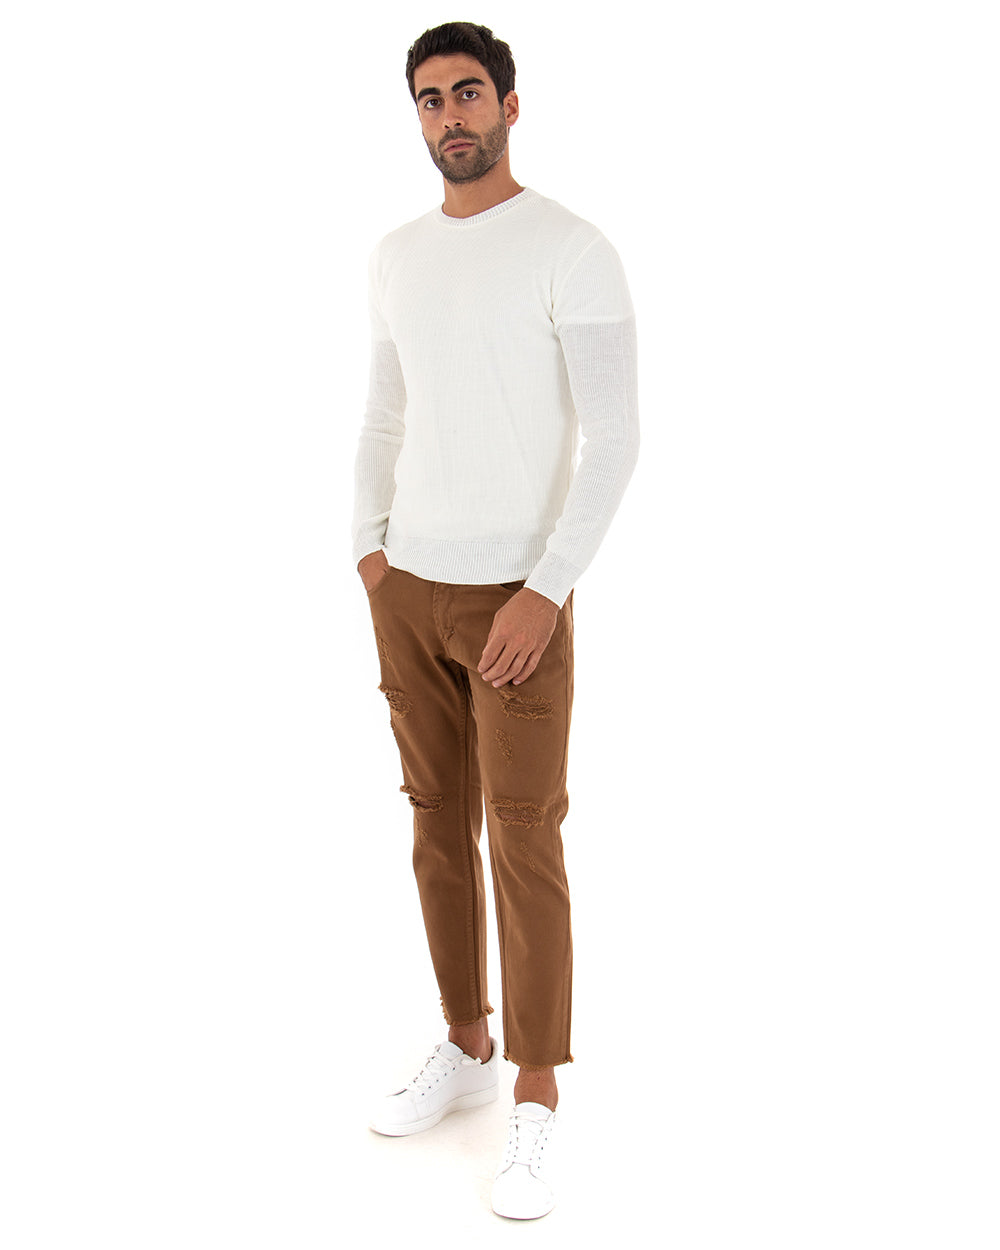 Men's Sweater Solid Color White Crew Neck Long Sleeve Basic Casual GIOSAL